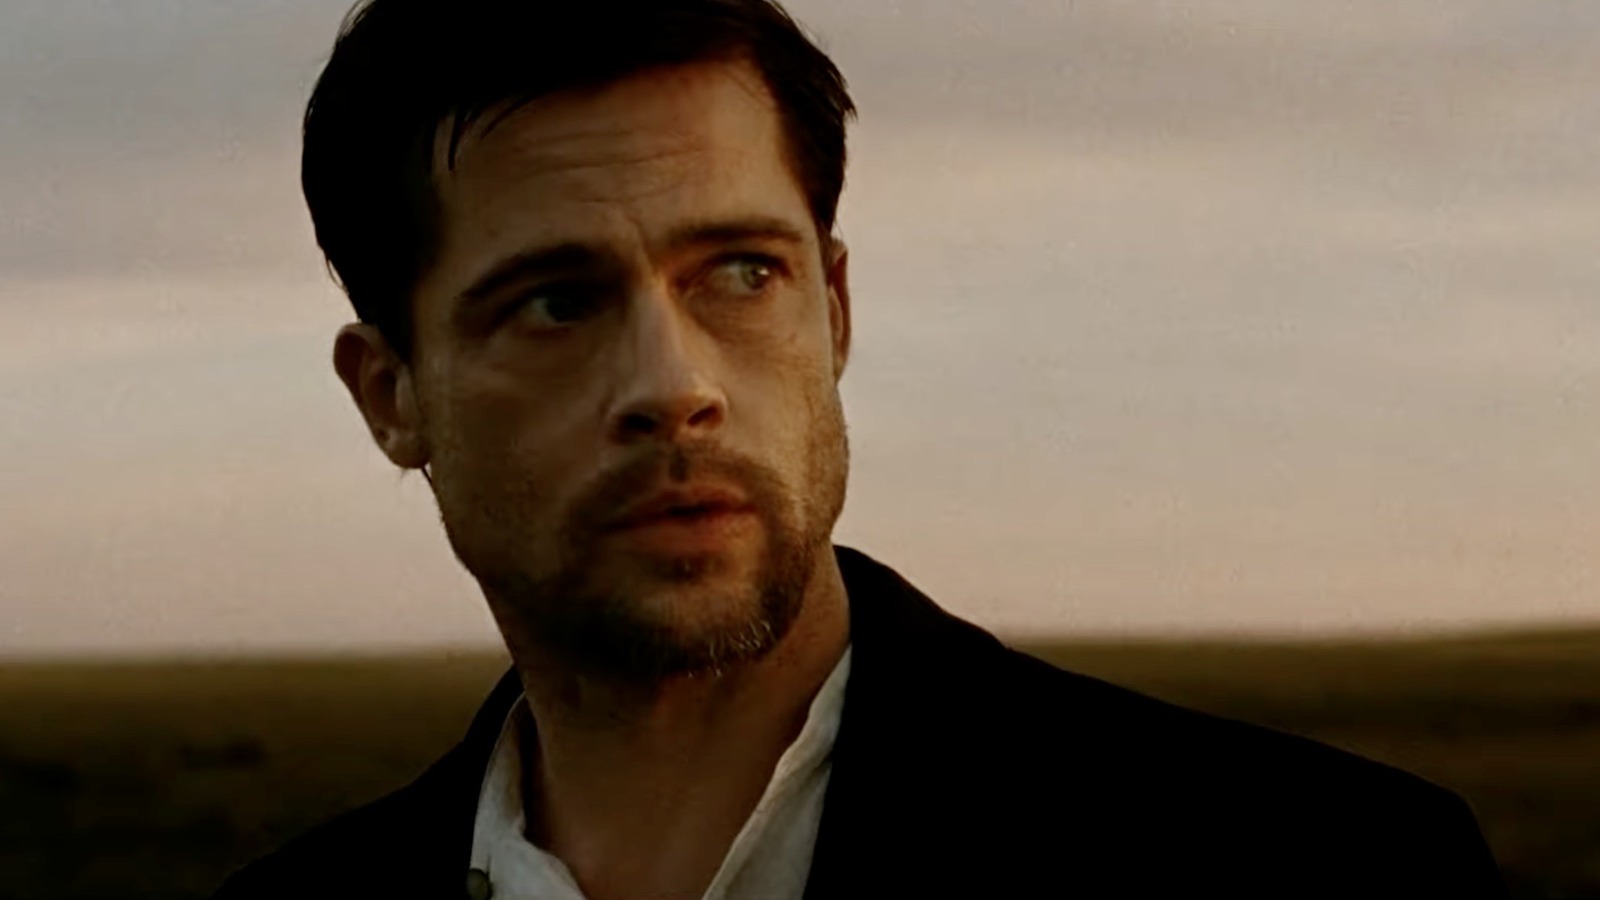 The Assassination Of Jesse James Director Says There's A Longer, Better